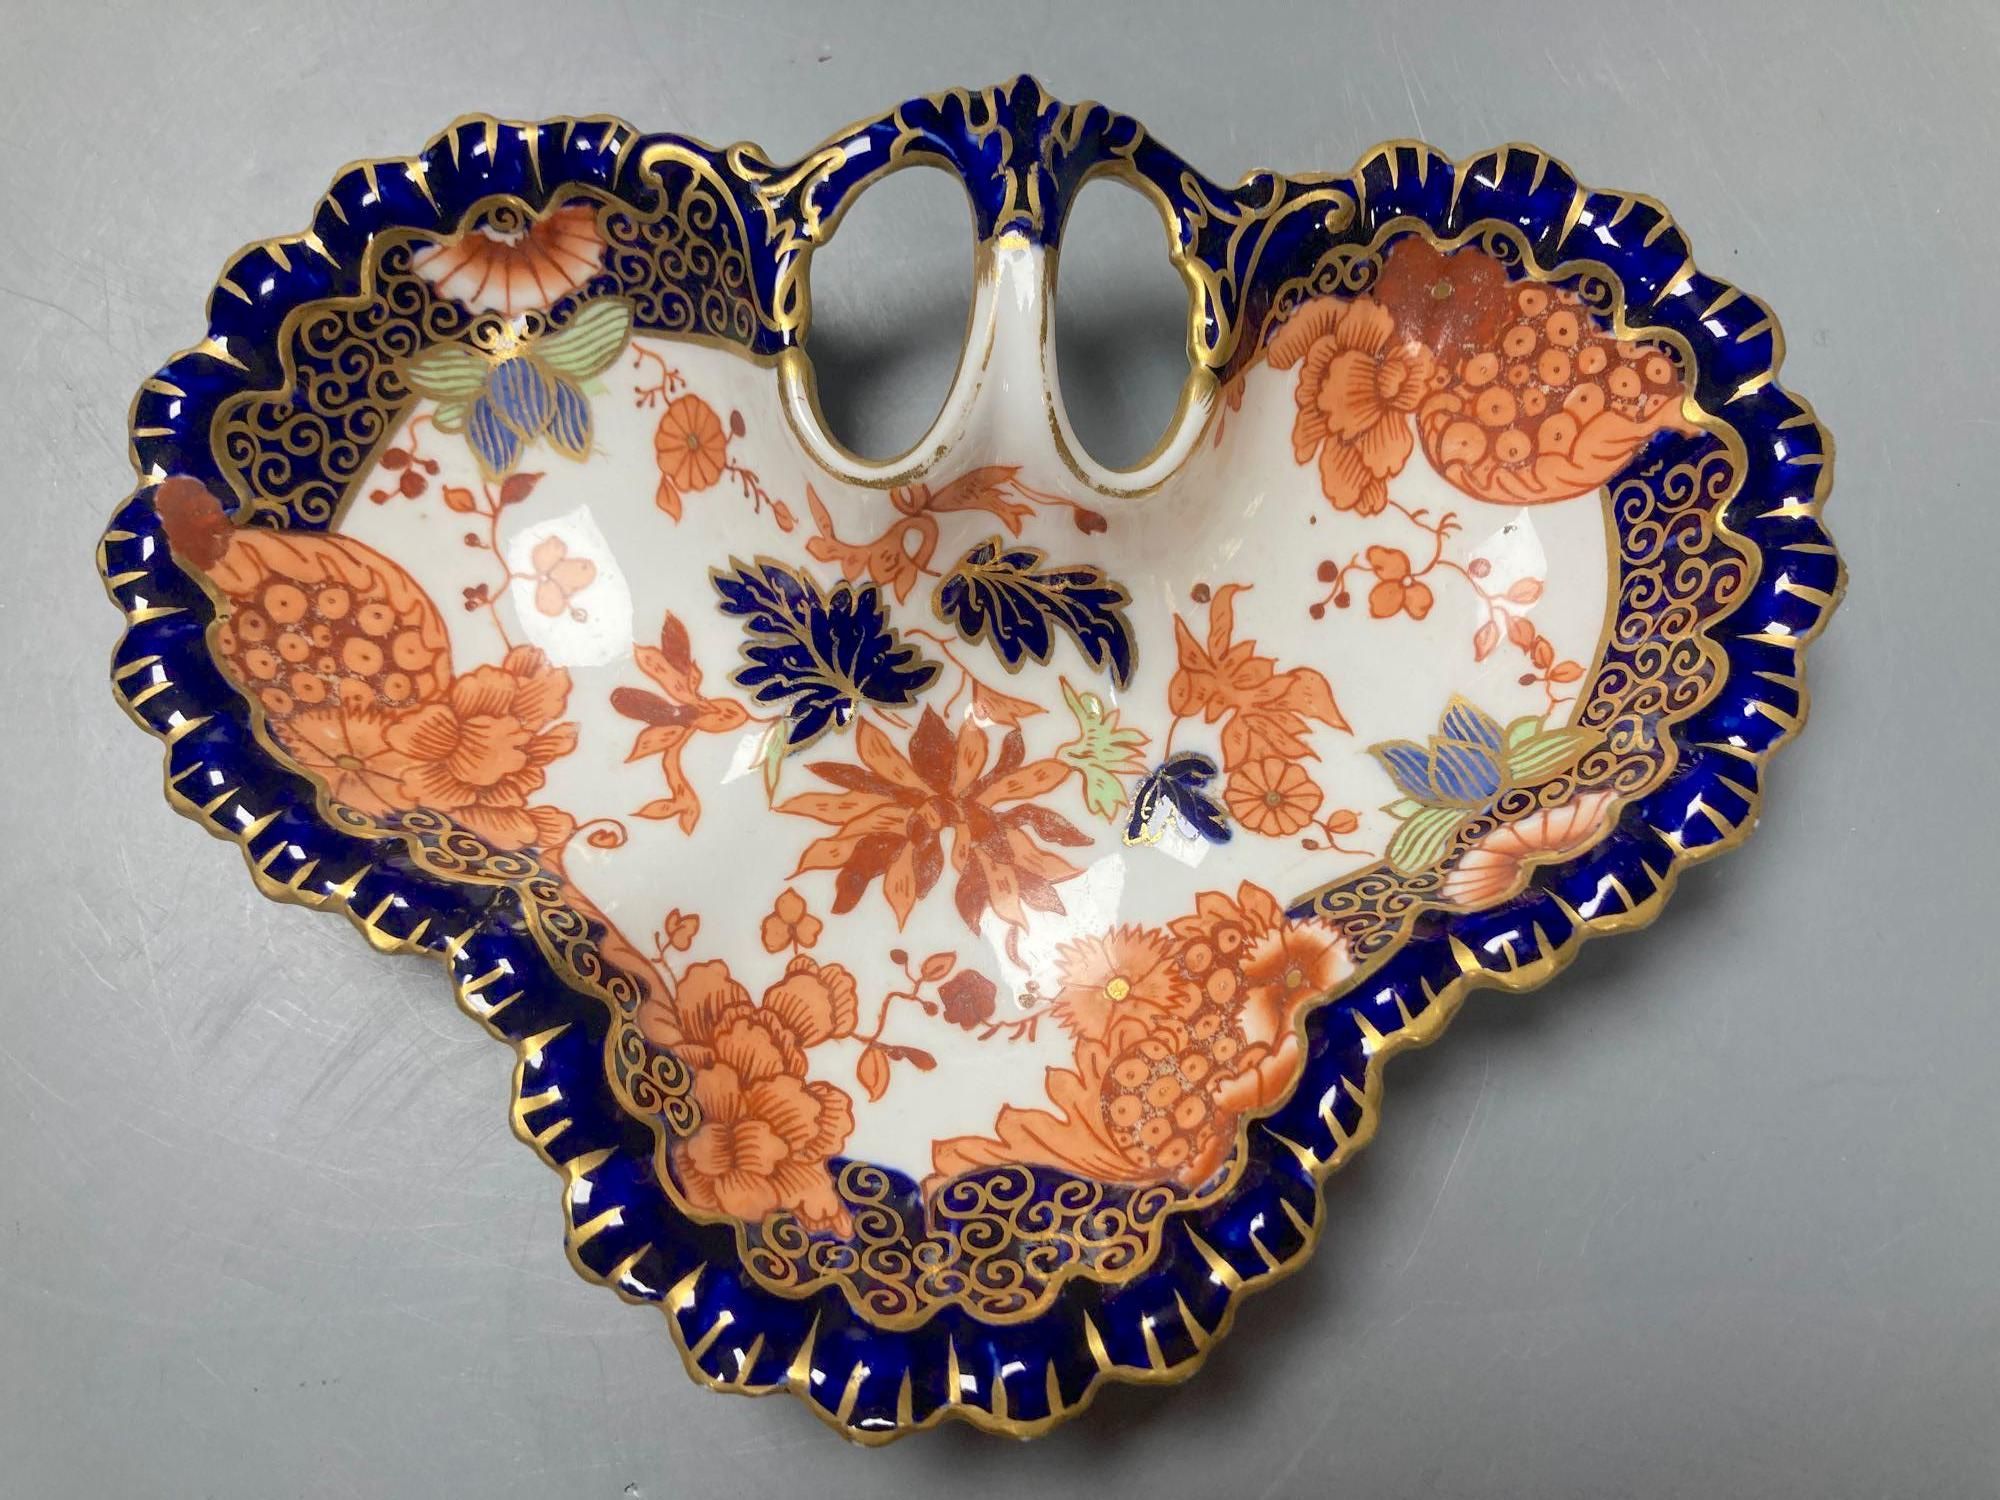 Two Royal Crown Derby dishes and a Royal Copenhagen plate, 26cm